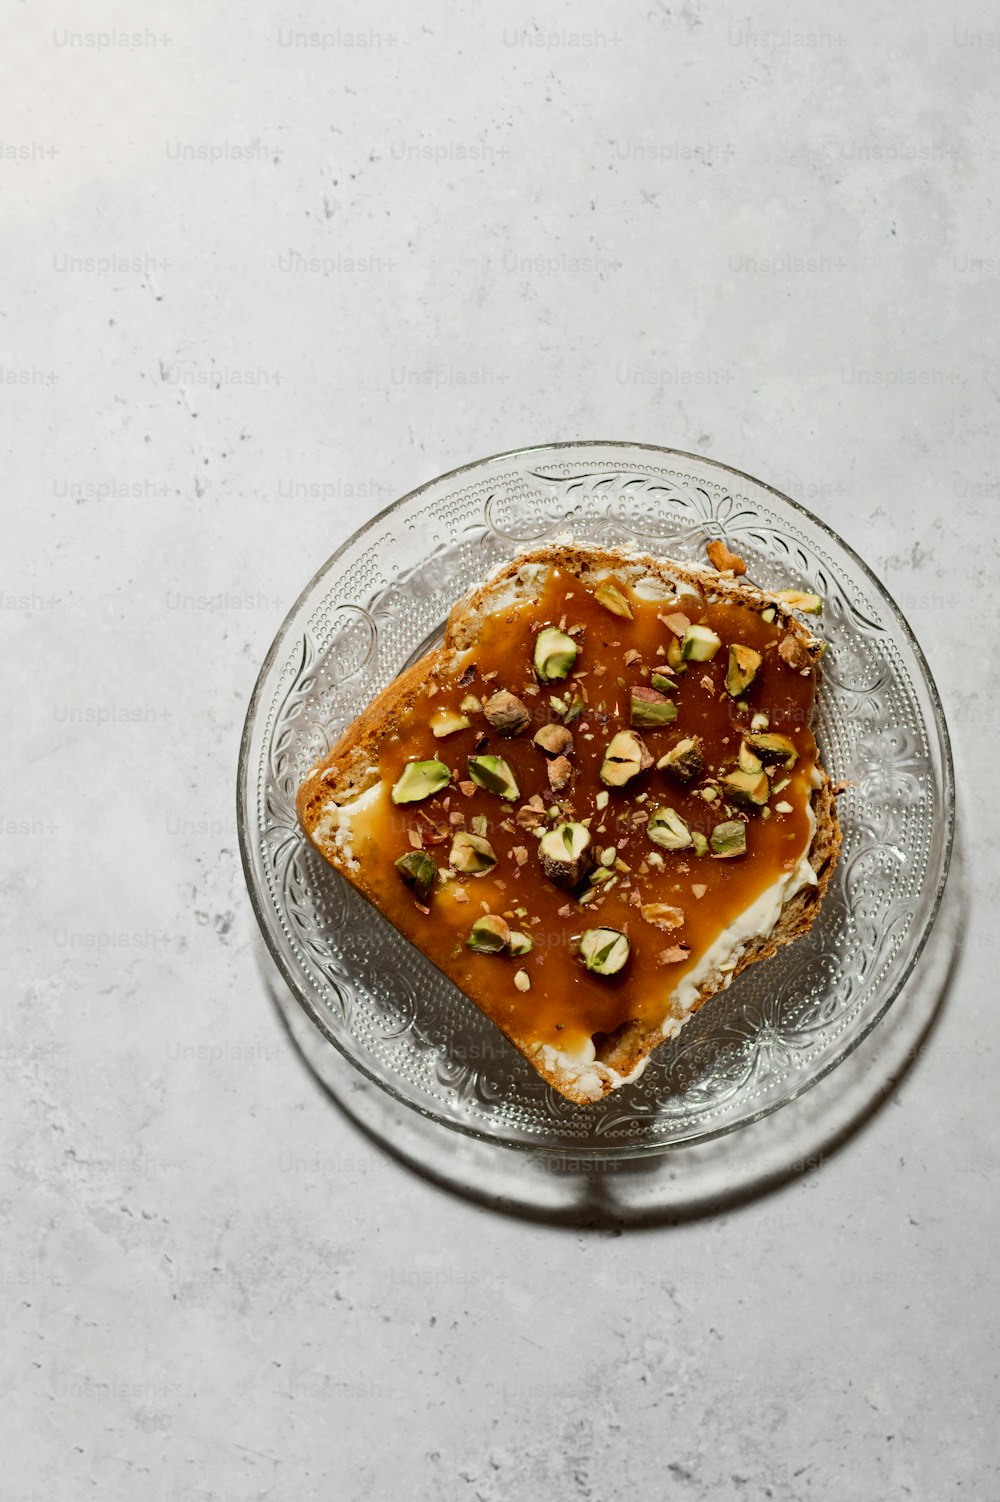 a piece of toast with nuts on top of it